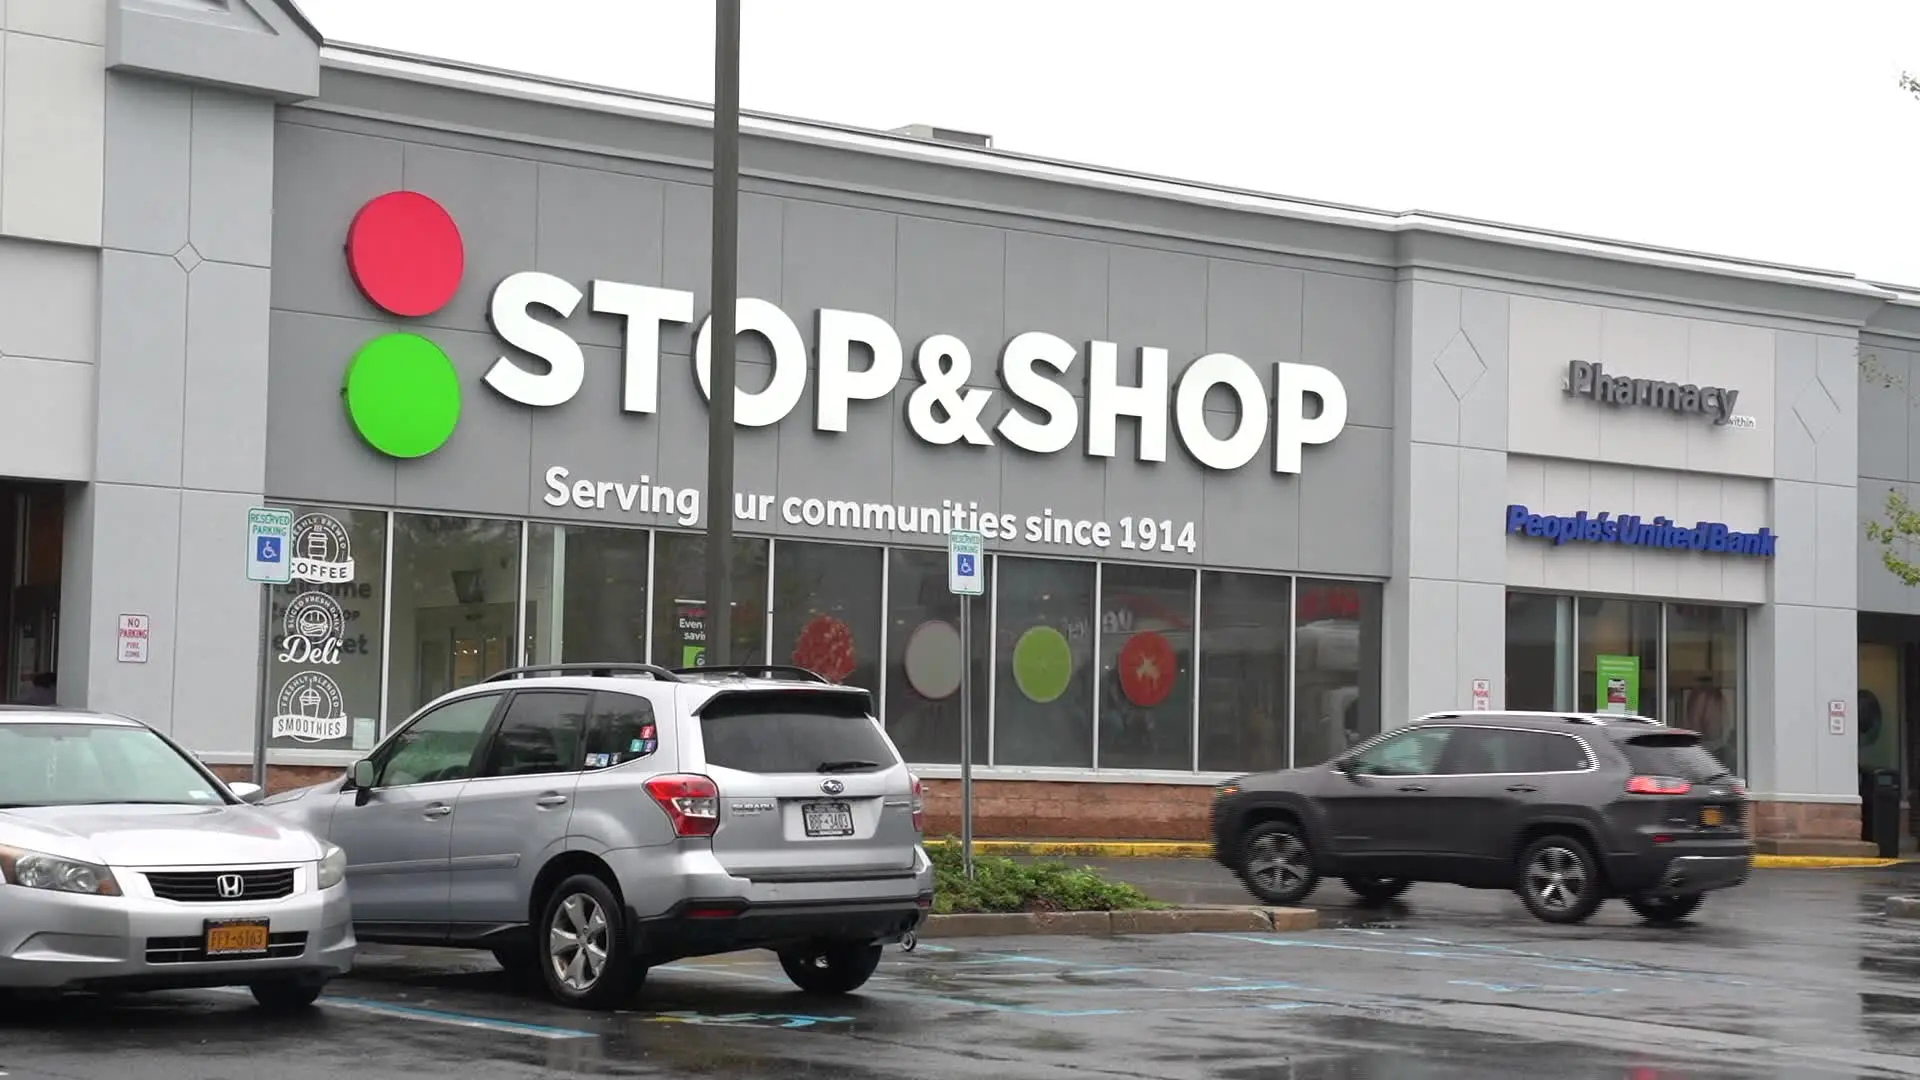 Facing High Prices, Stop & Shop Ponders Store Closures A Strategic Shift in the Retail Landscape